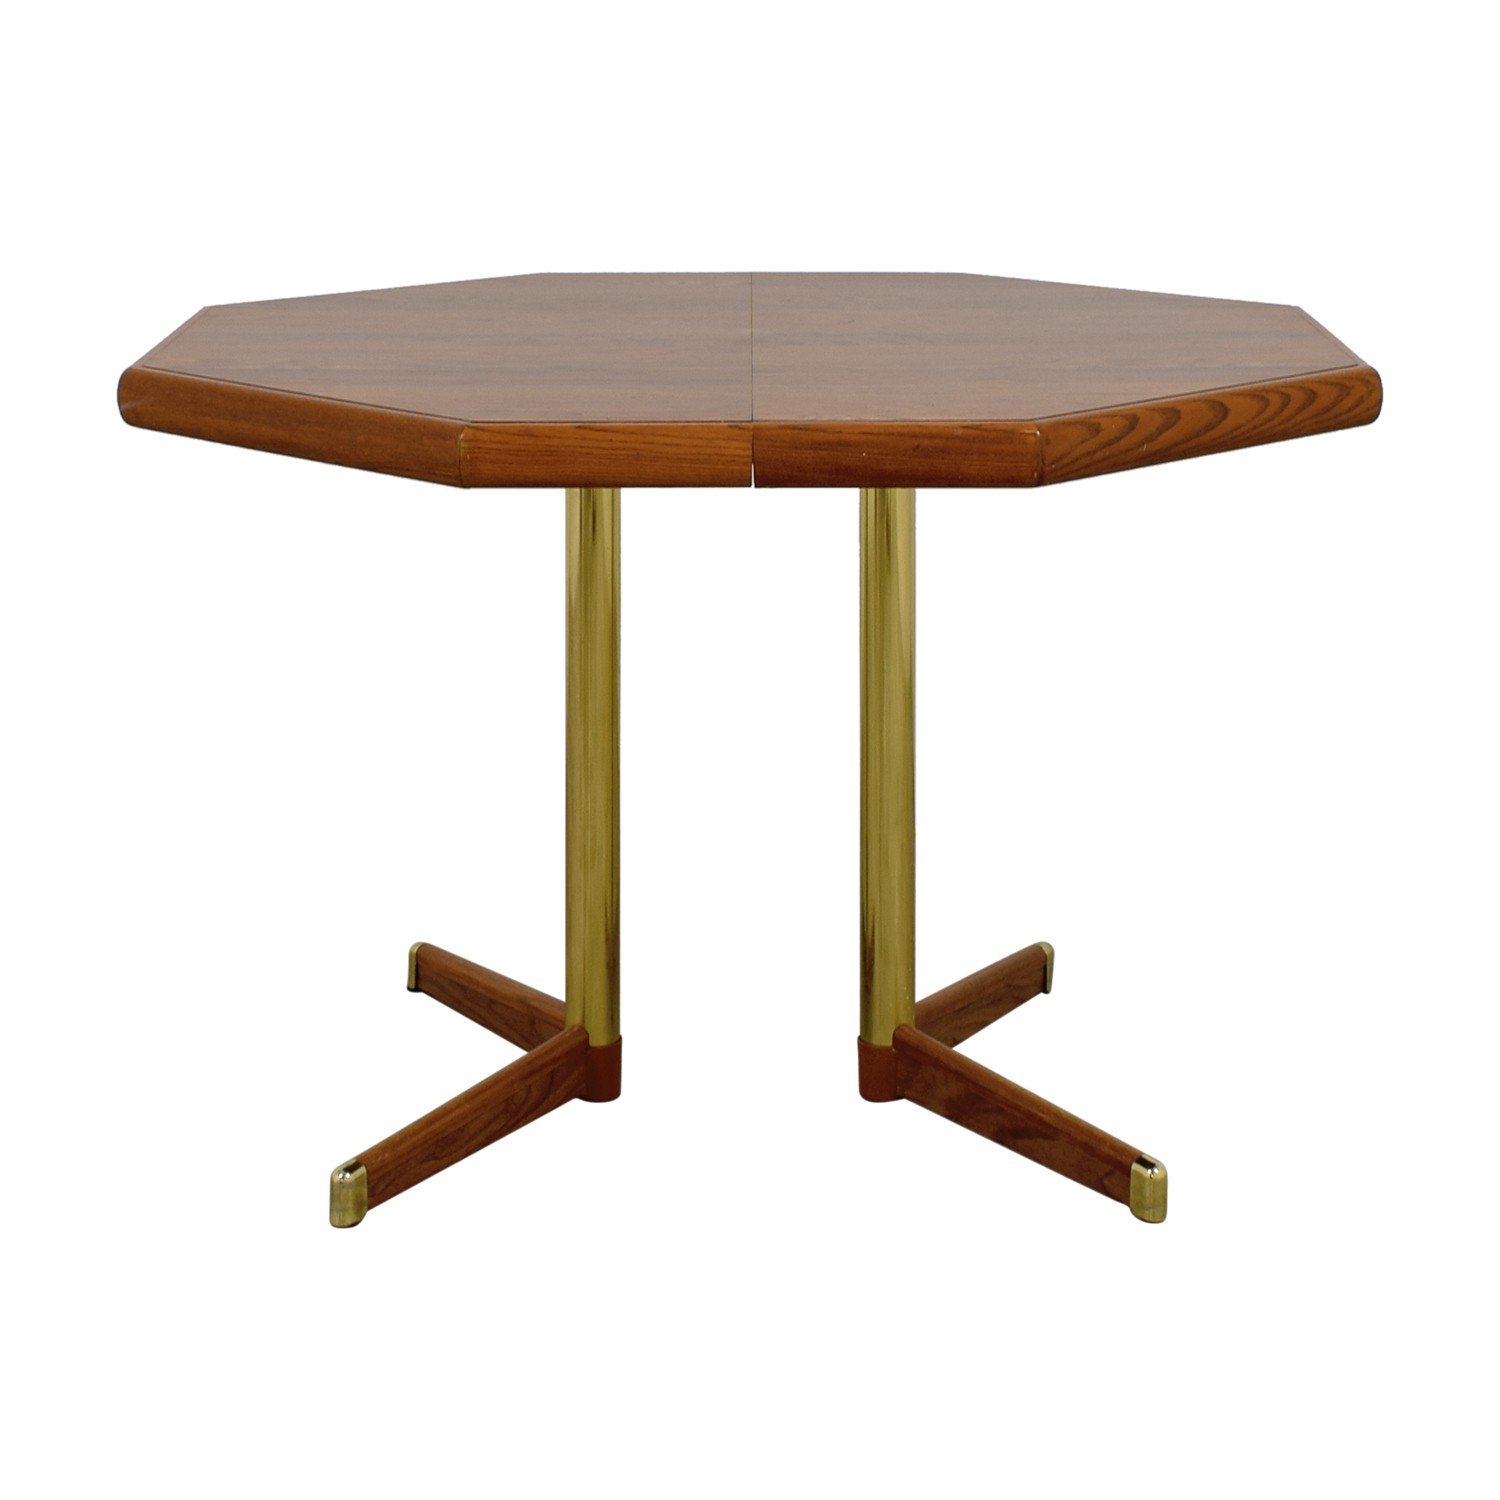 80 off octagon kitchen table with leaf tables